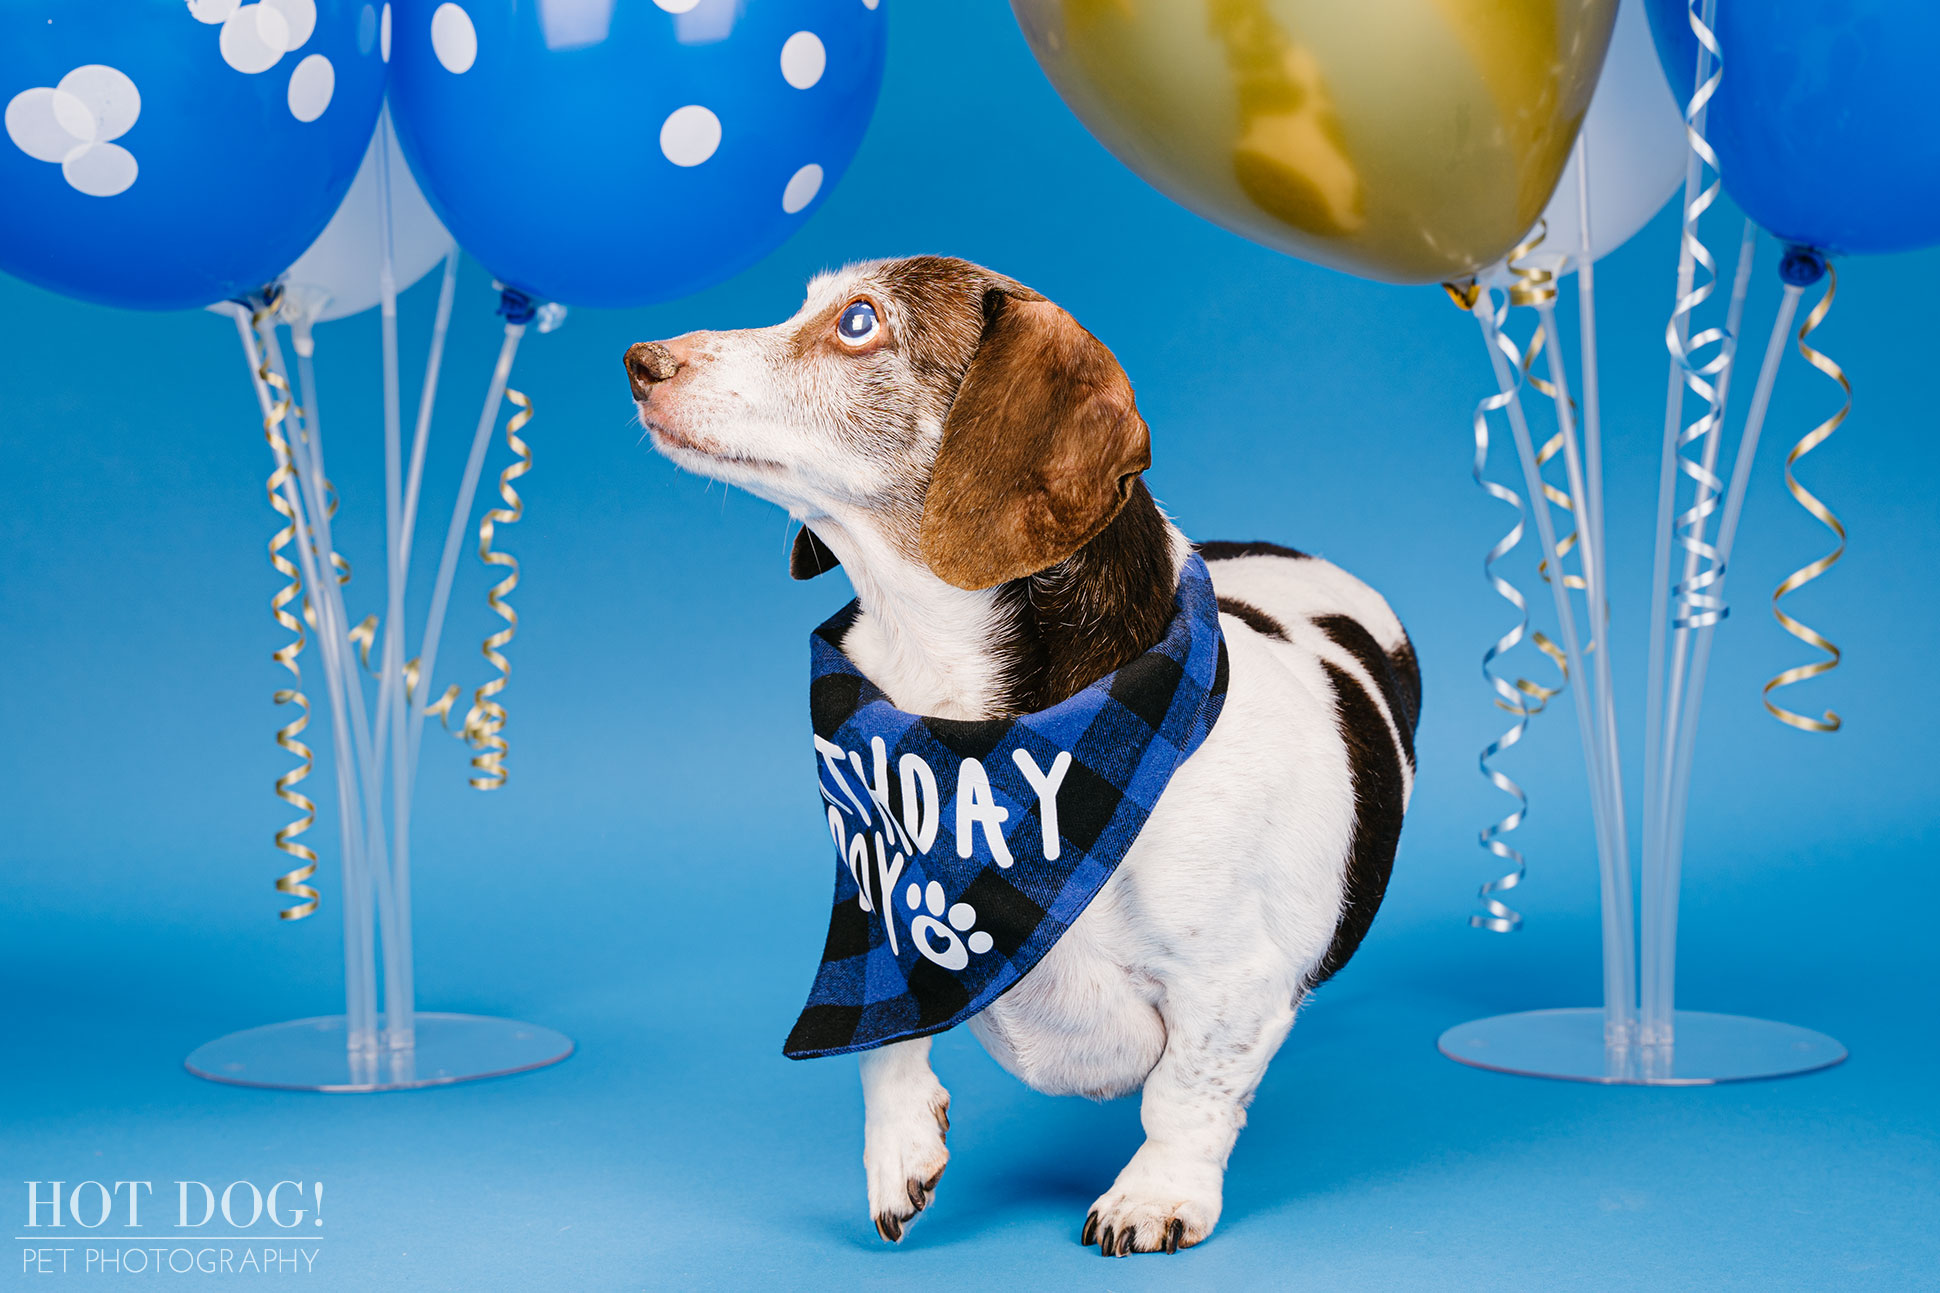 Dog birthday photo by Hot Dog! Pet Photography in Central Florida